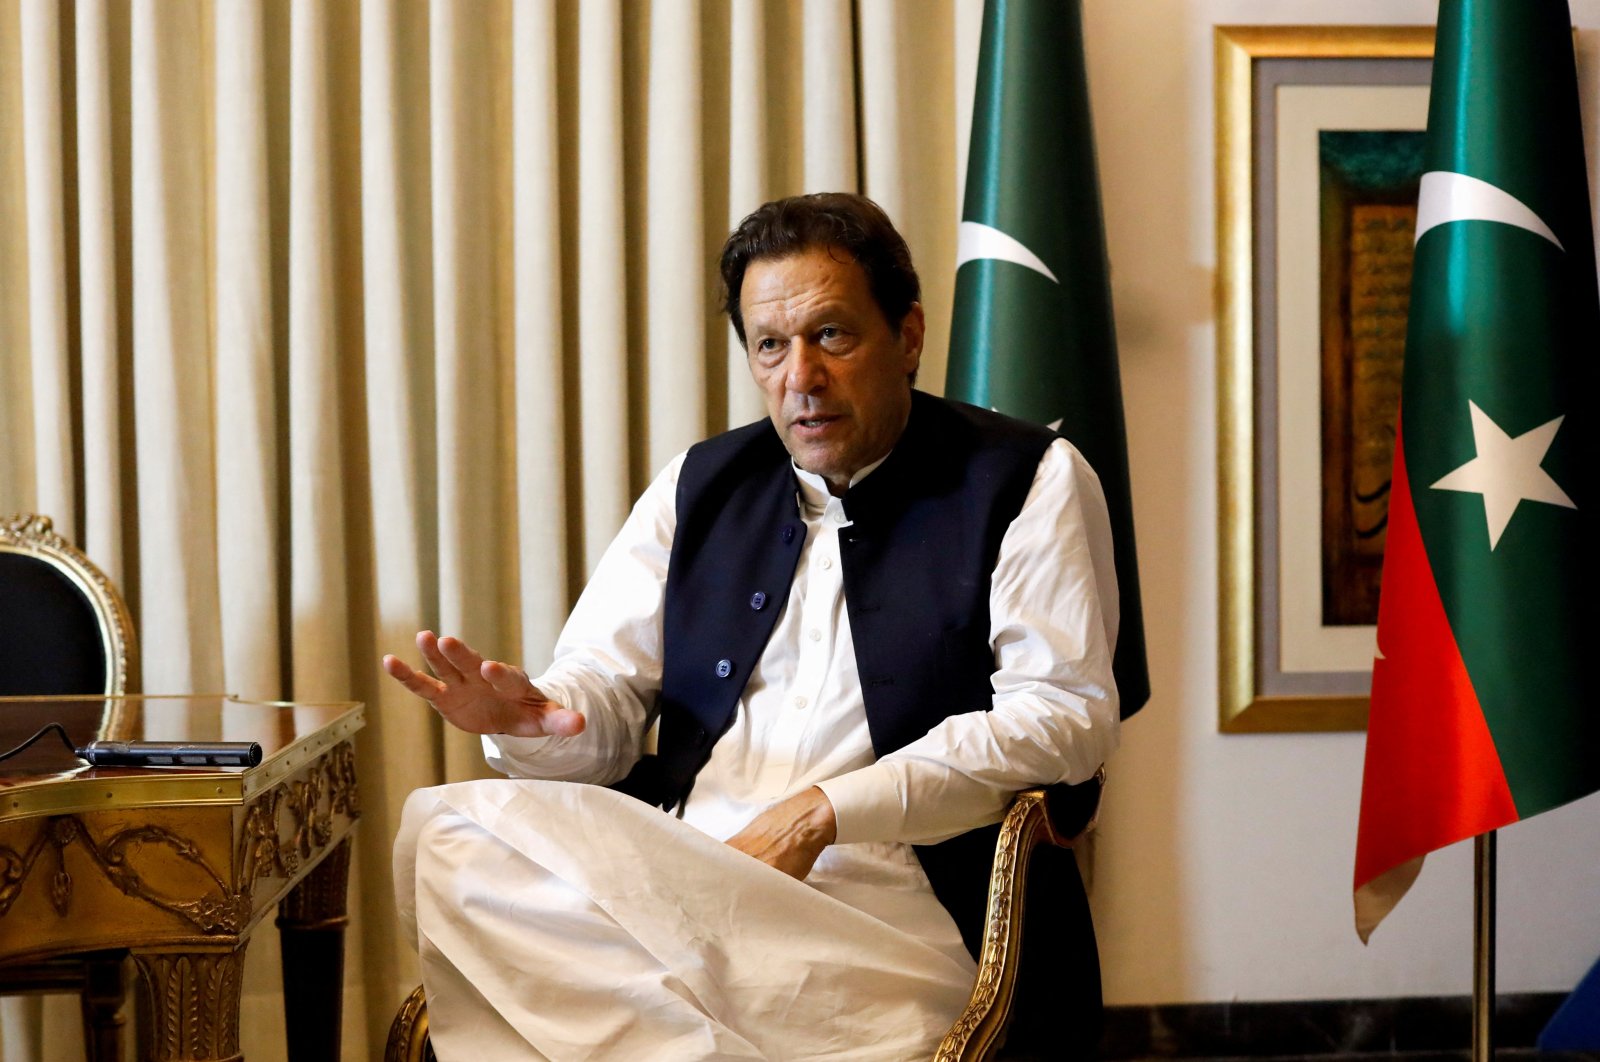 Former Pakistani Prime Minister Imran Khan speaks during an interview, in Lahore, Pakistan, March 17, 2023. (Reuters Photo)